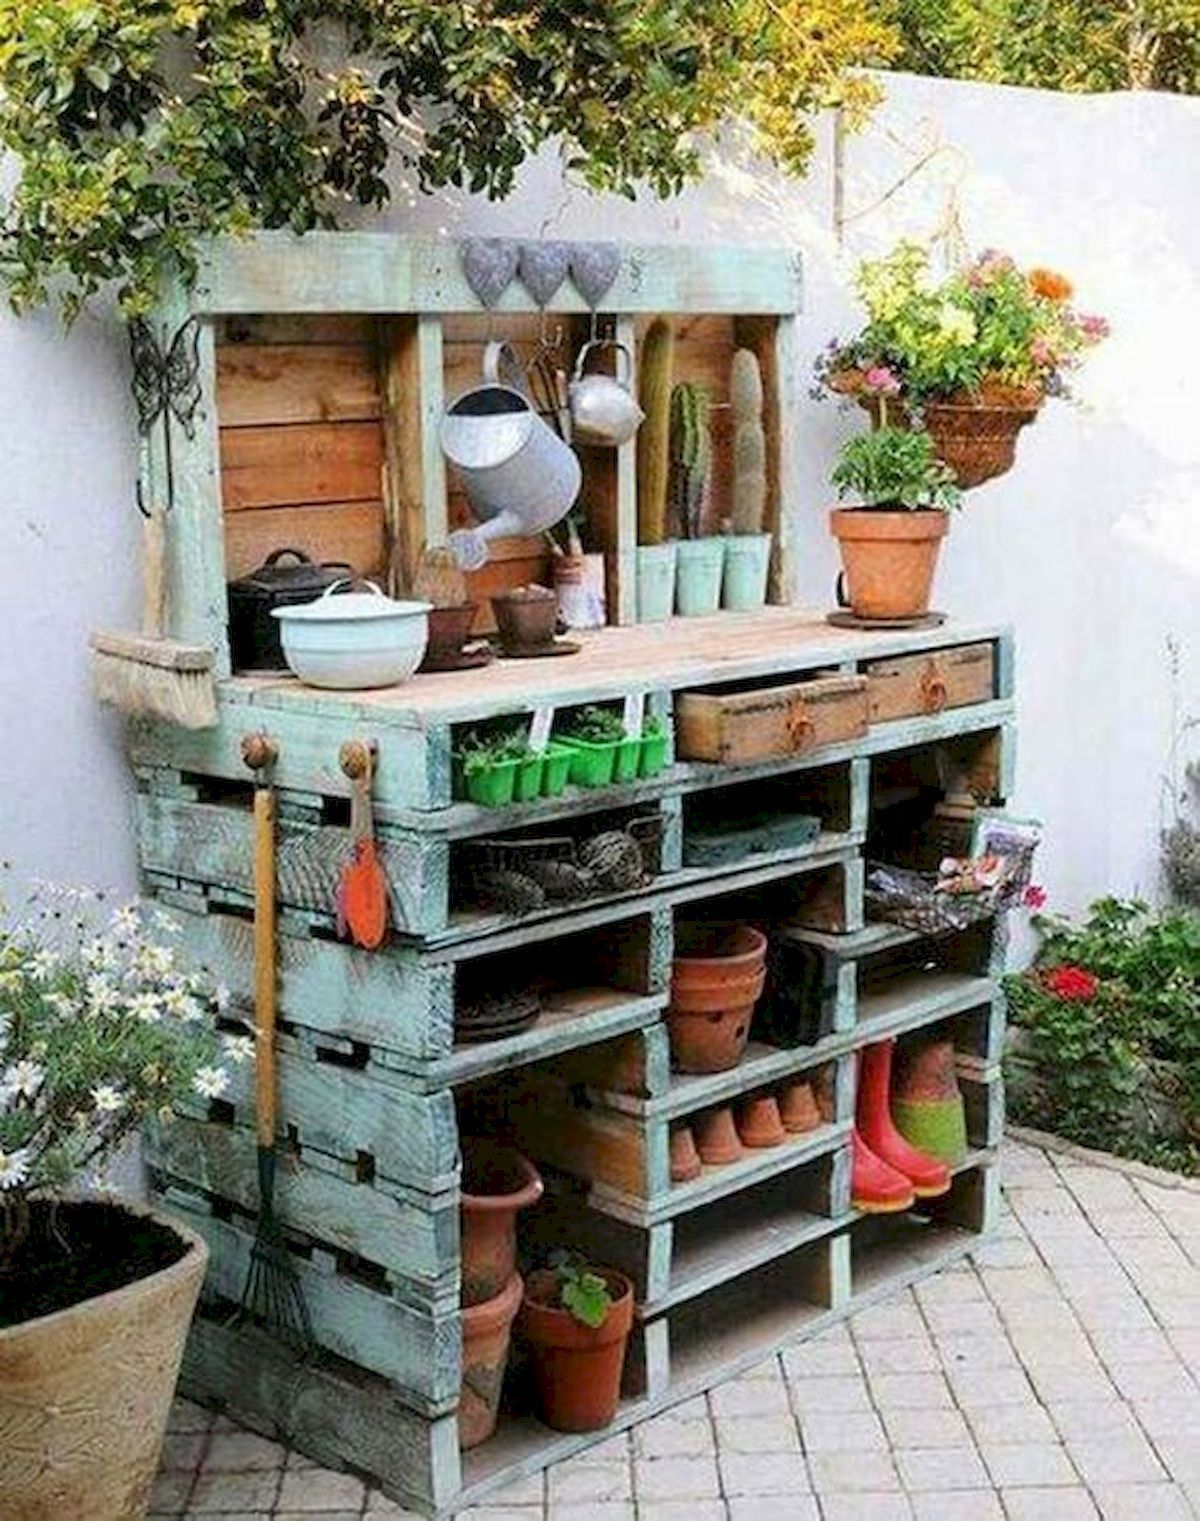 20 diy projects For Outside planters
 ideas